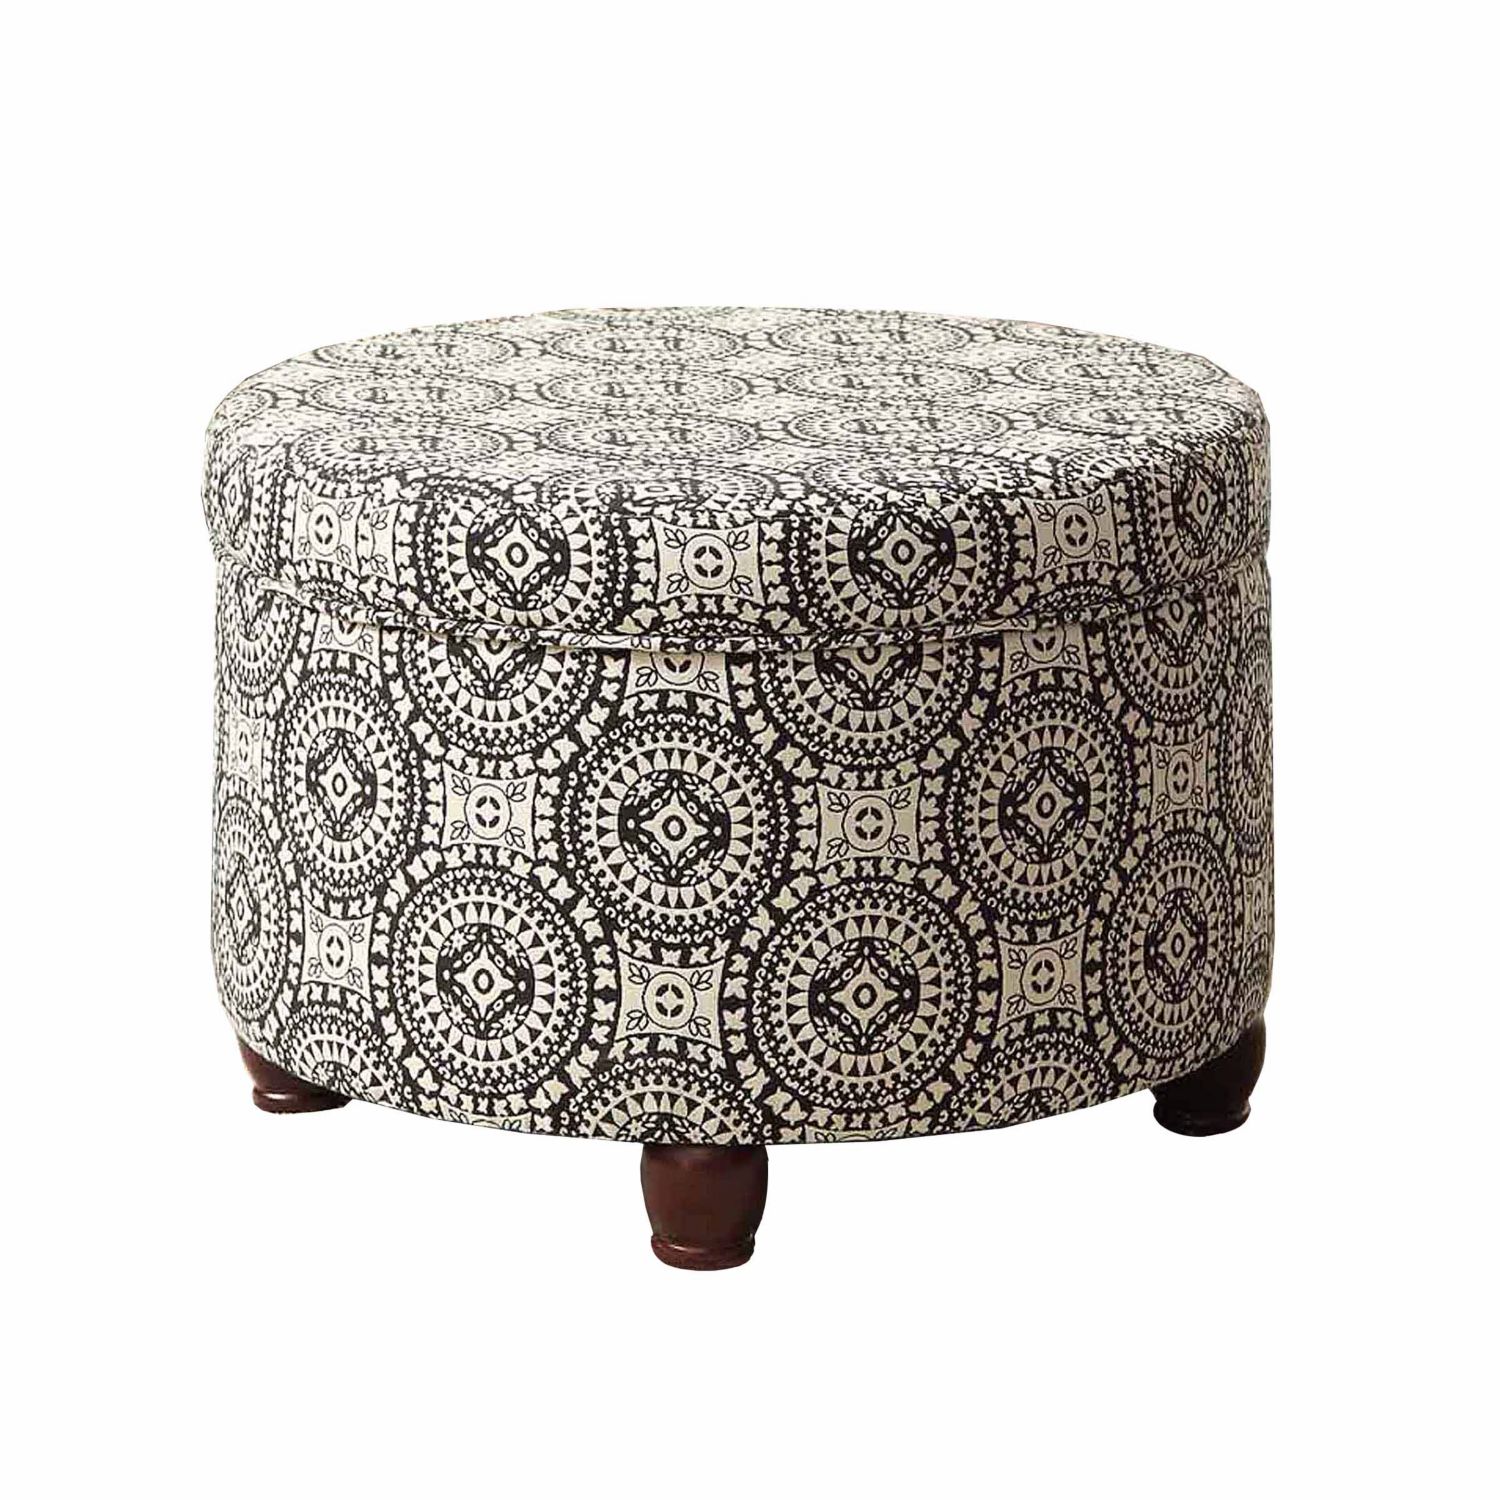 Image for HomePop Small Storage Ottoman at Kohl's.